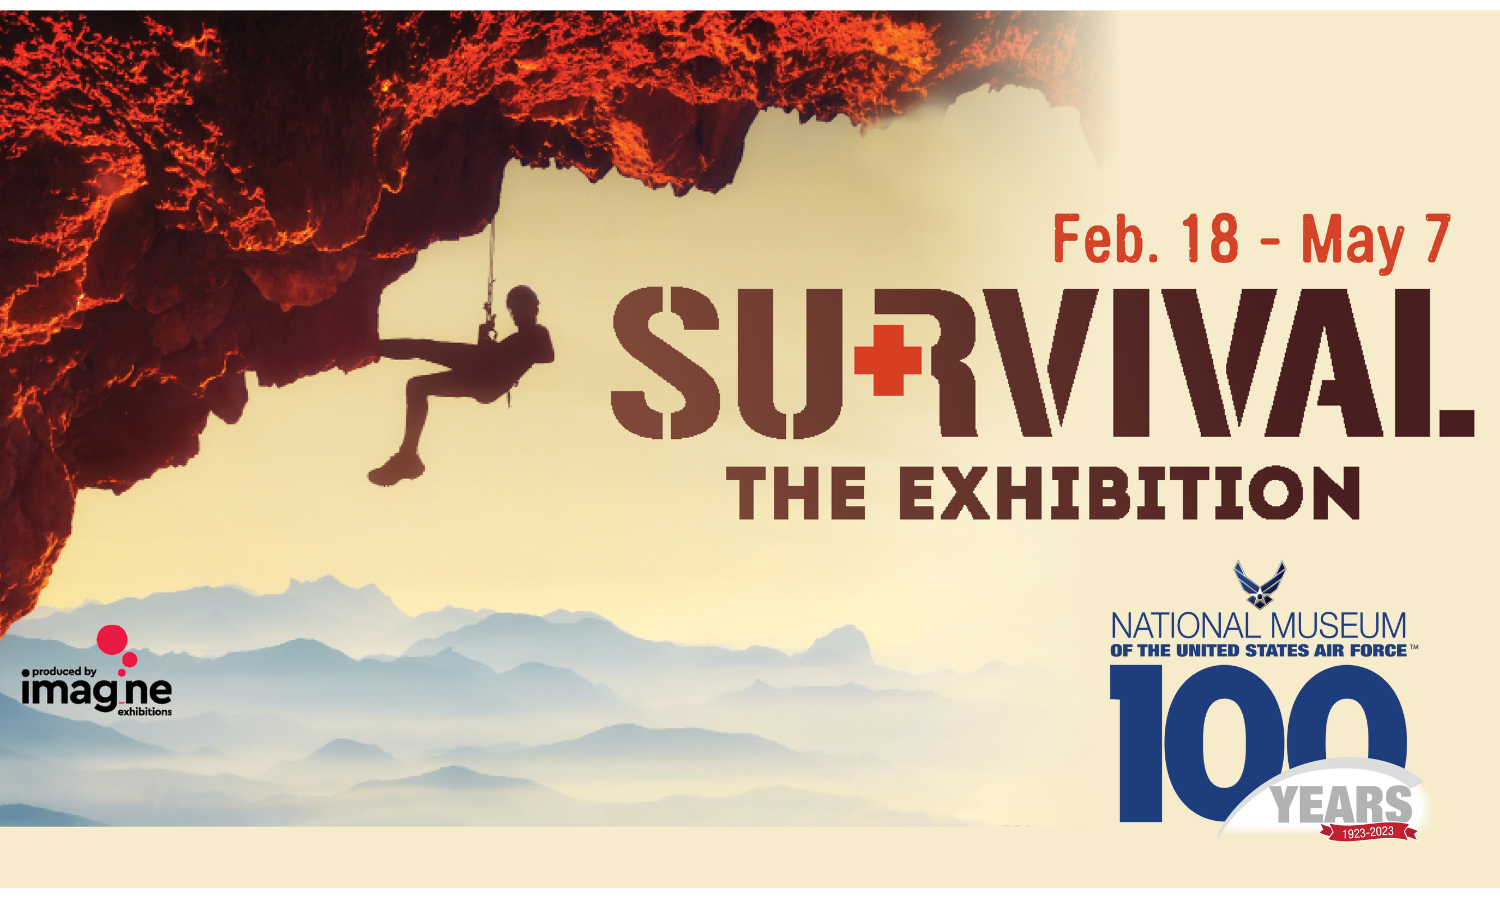 Survival the exhibition, Feb. 18 - May